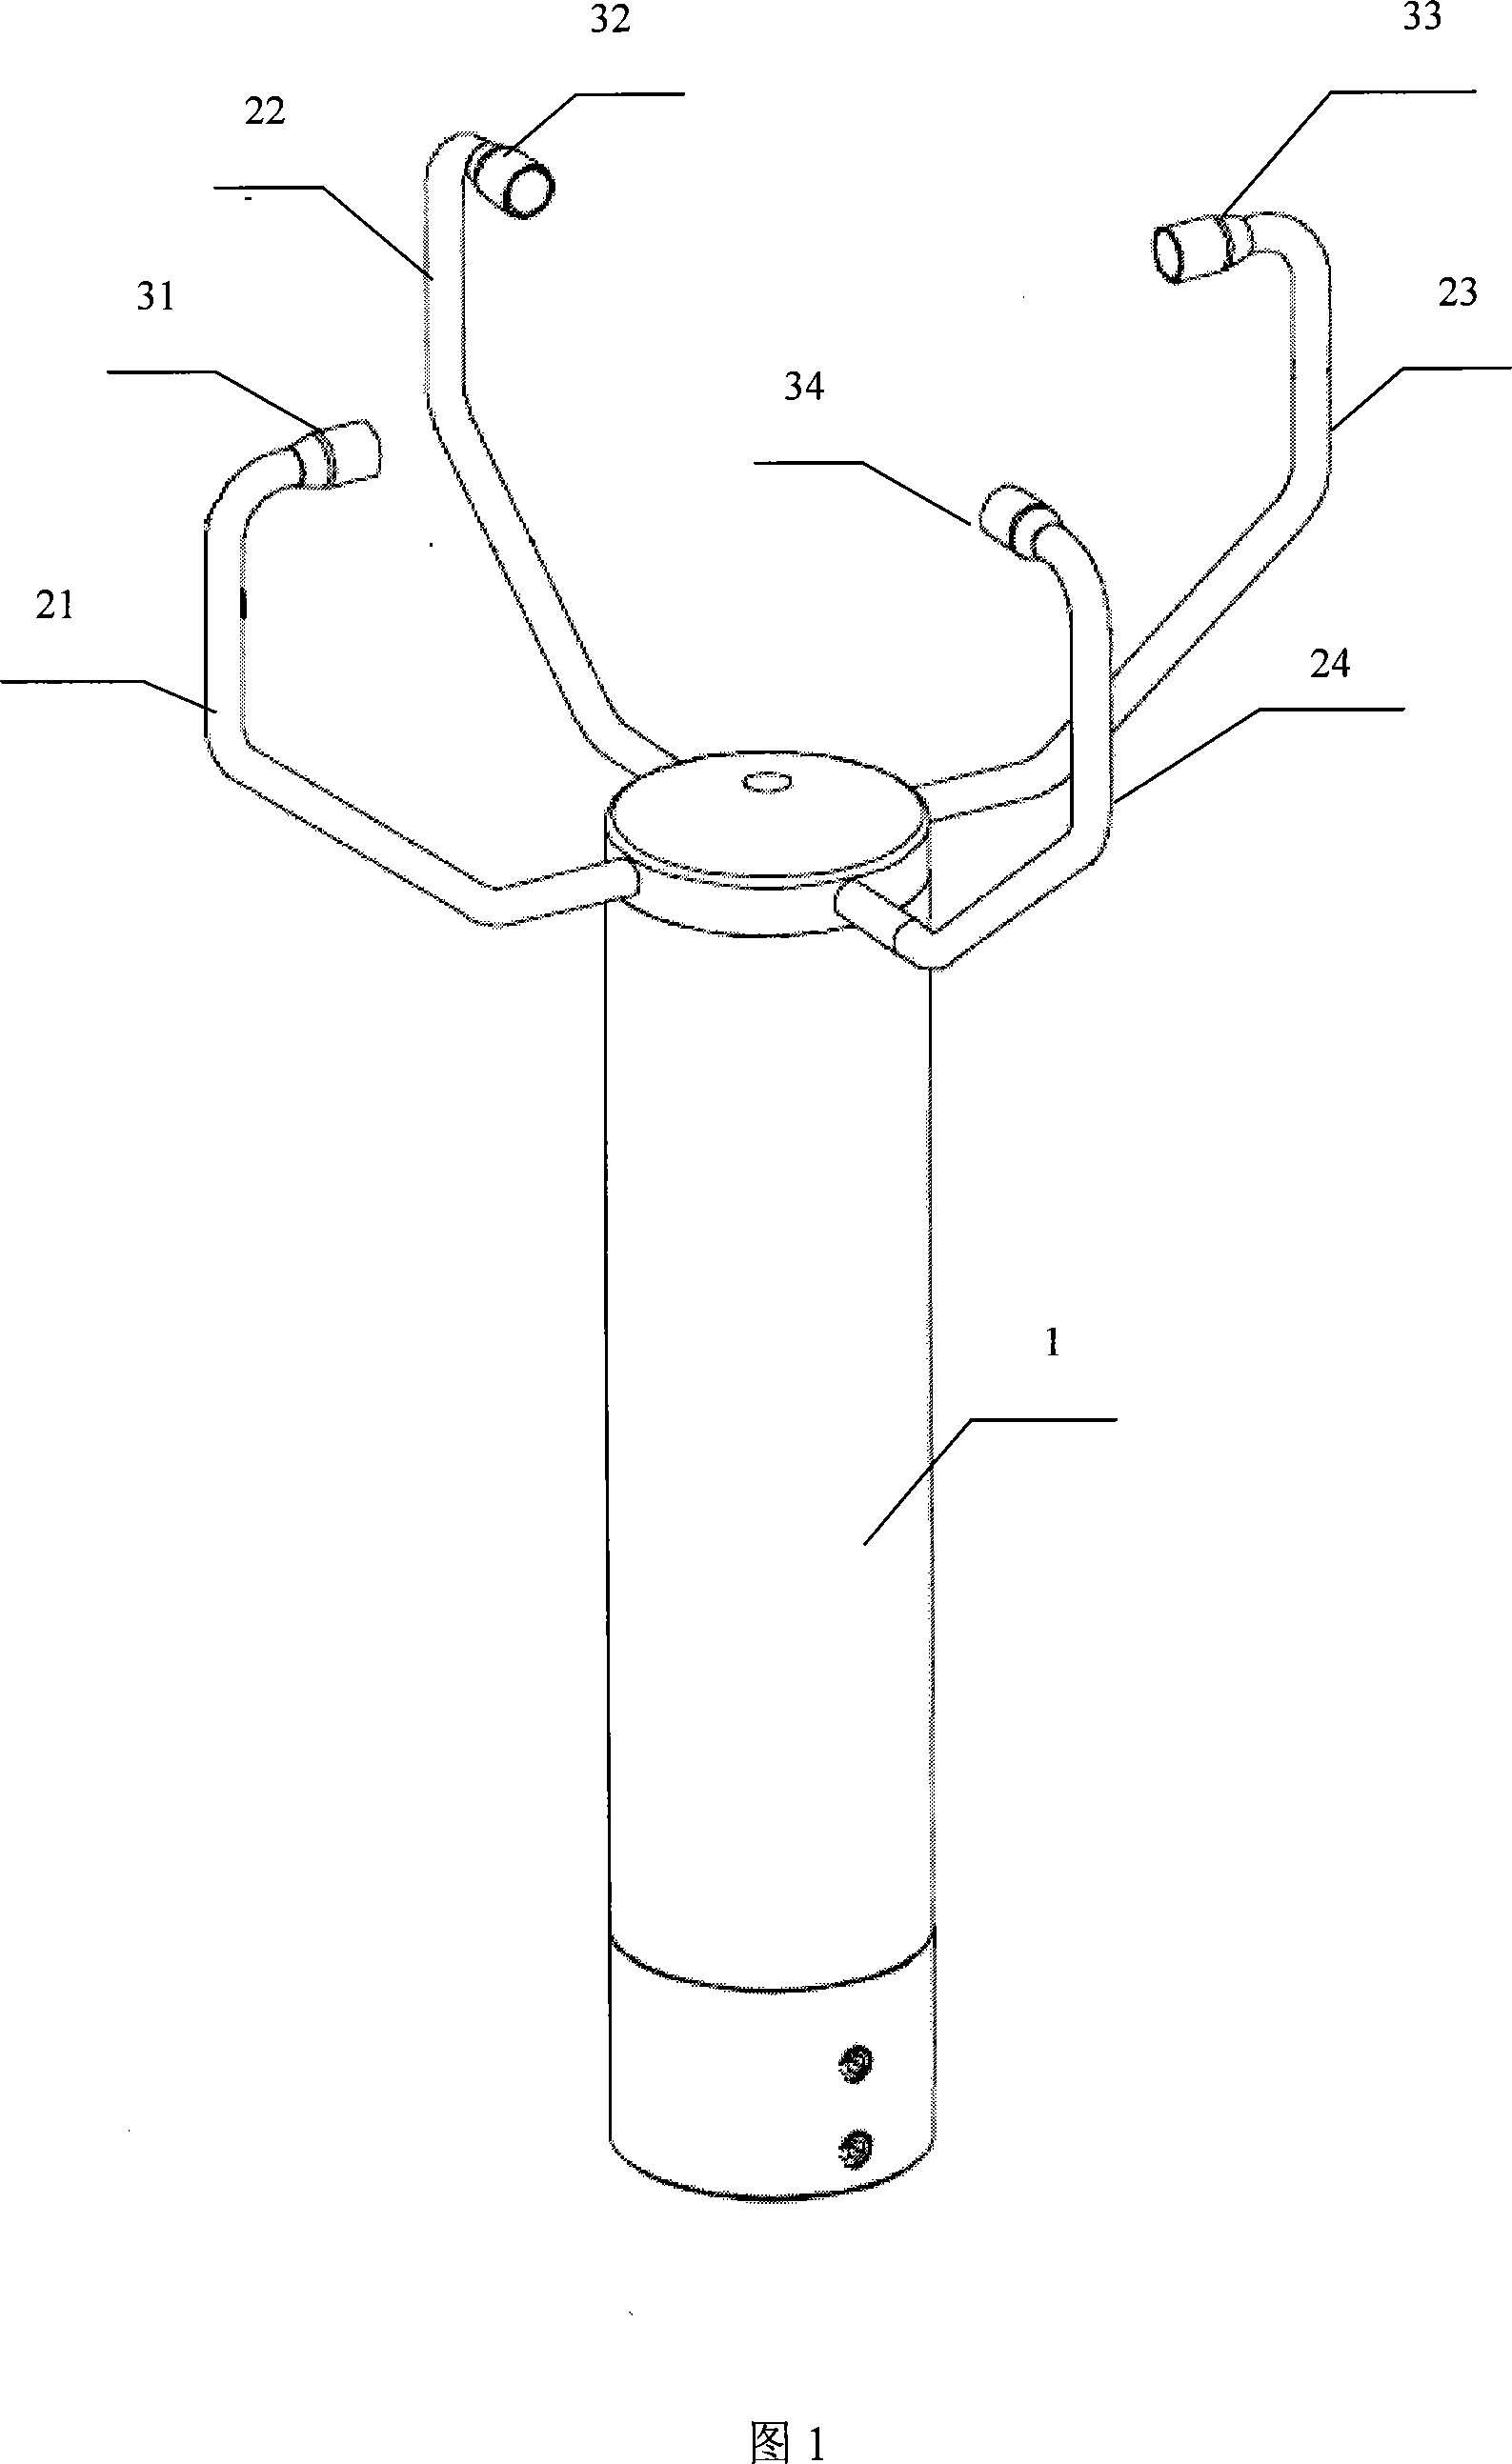 Ultrasonics wind velocity indicator and method for measuring wind velocity and wind direction by ultrasonic